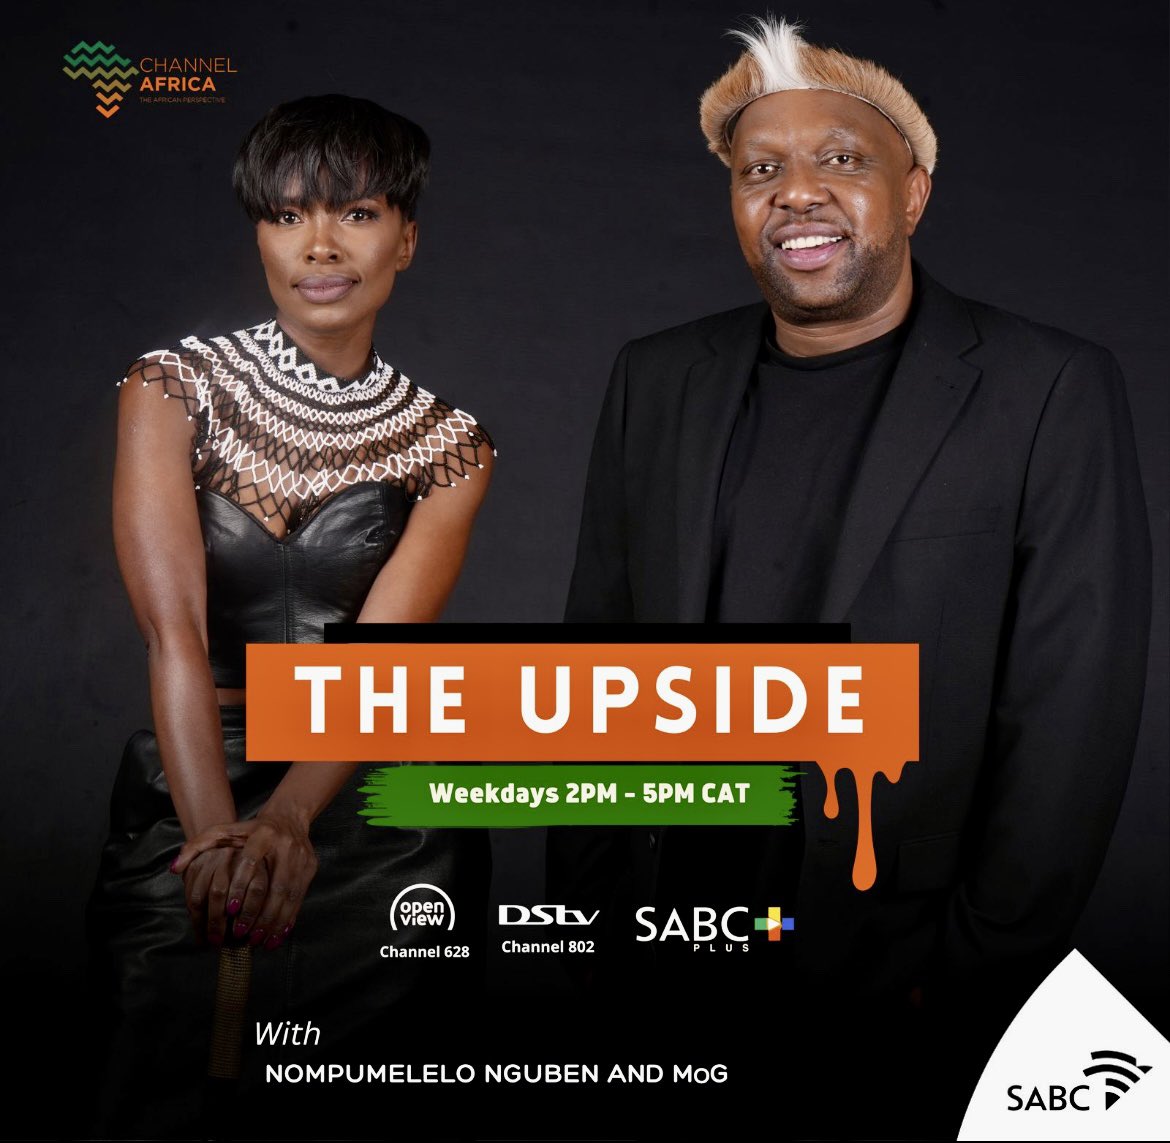 Welcome to #TheUpside with @MpumiNgubeni and @mog_moments 

Get your latest news, views and entertainment, right here on #ChannelAfrica the #AfricanPerspective